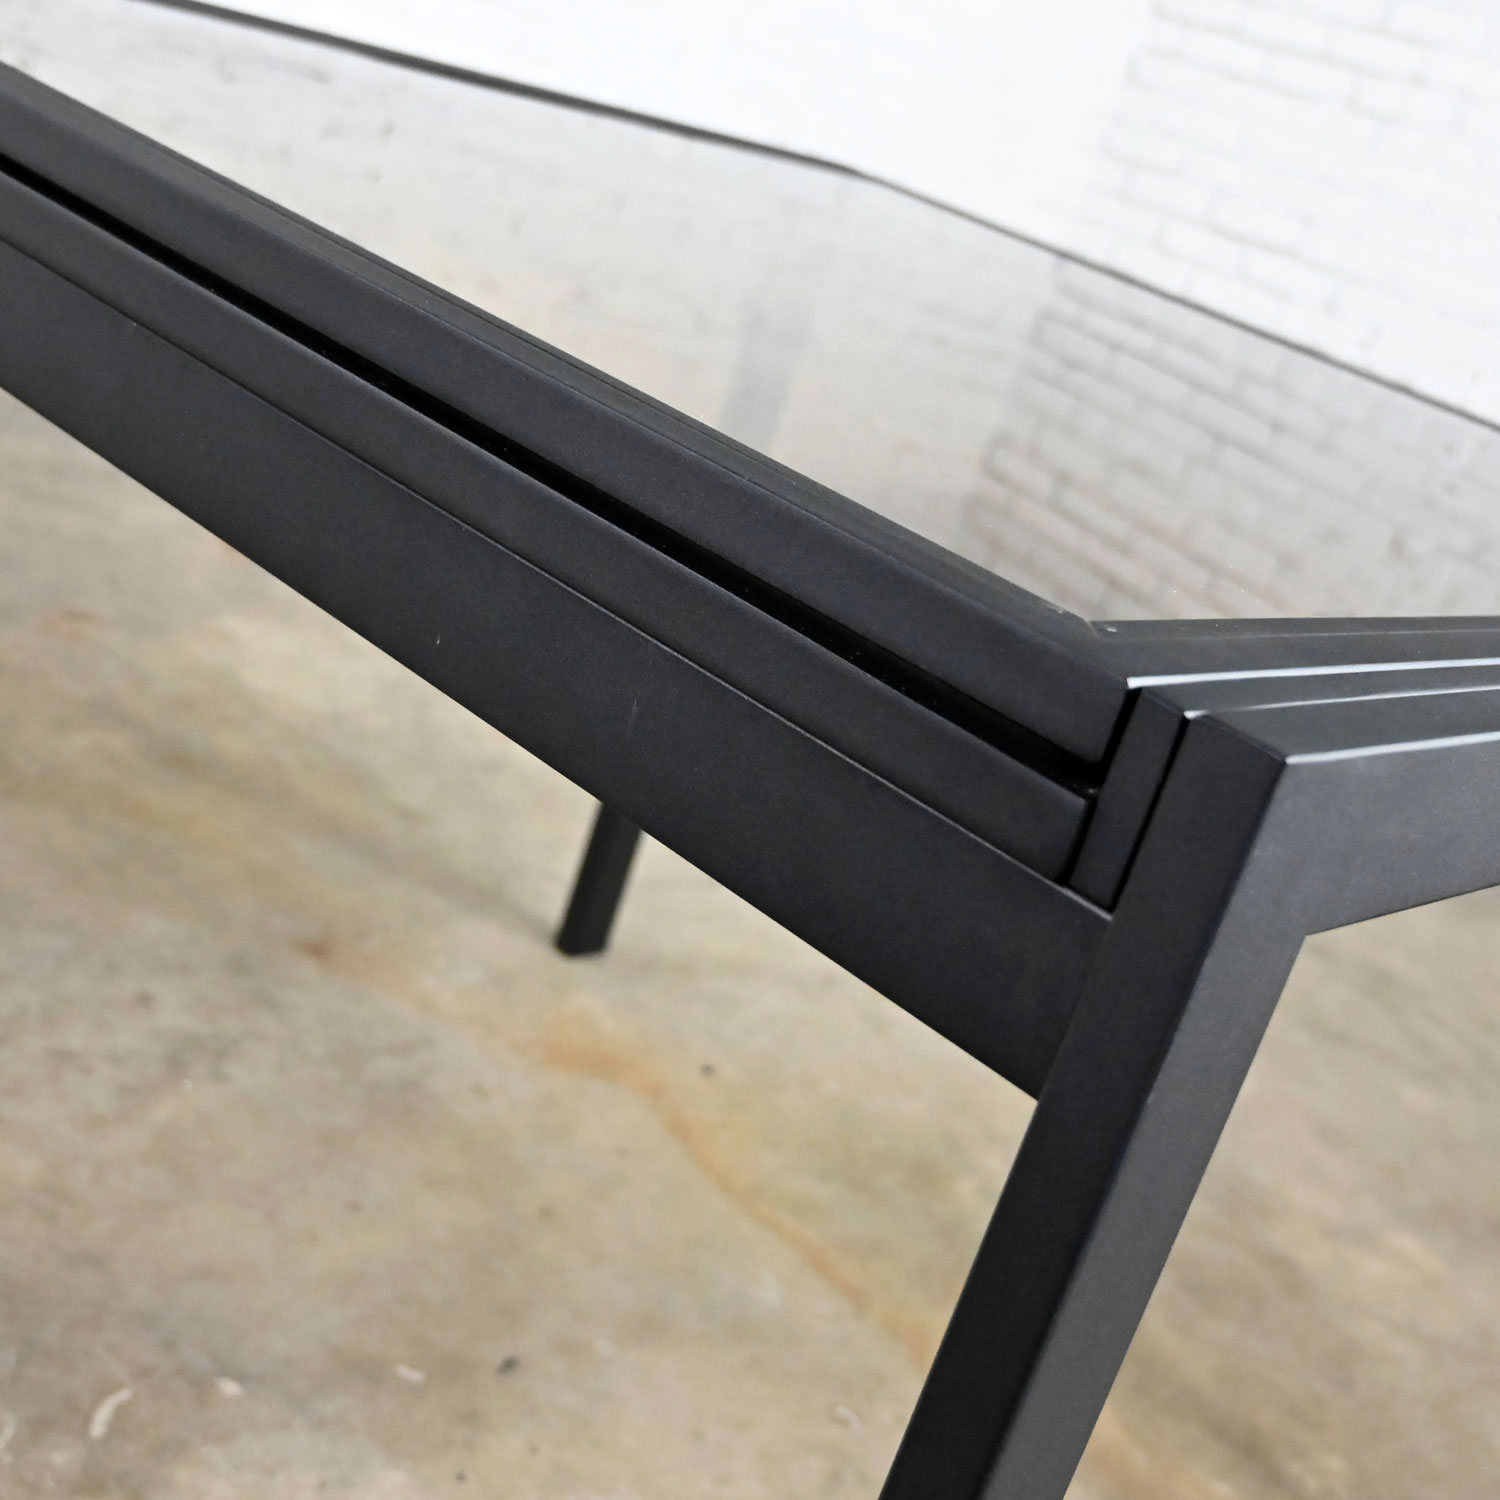 MCM to Modern Black Powder Coated Metal Smoked Glass Square Expanding Table Attributed to DIA